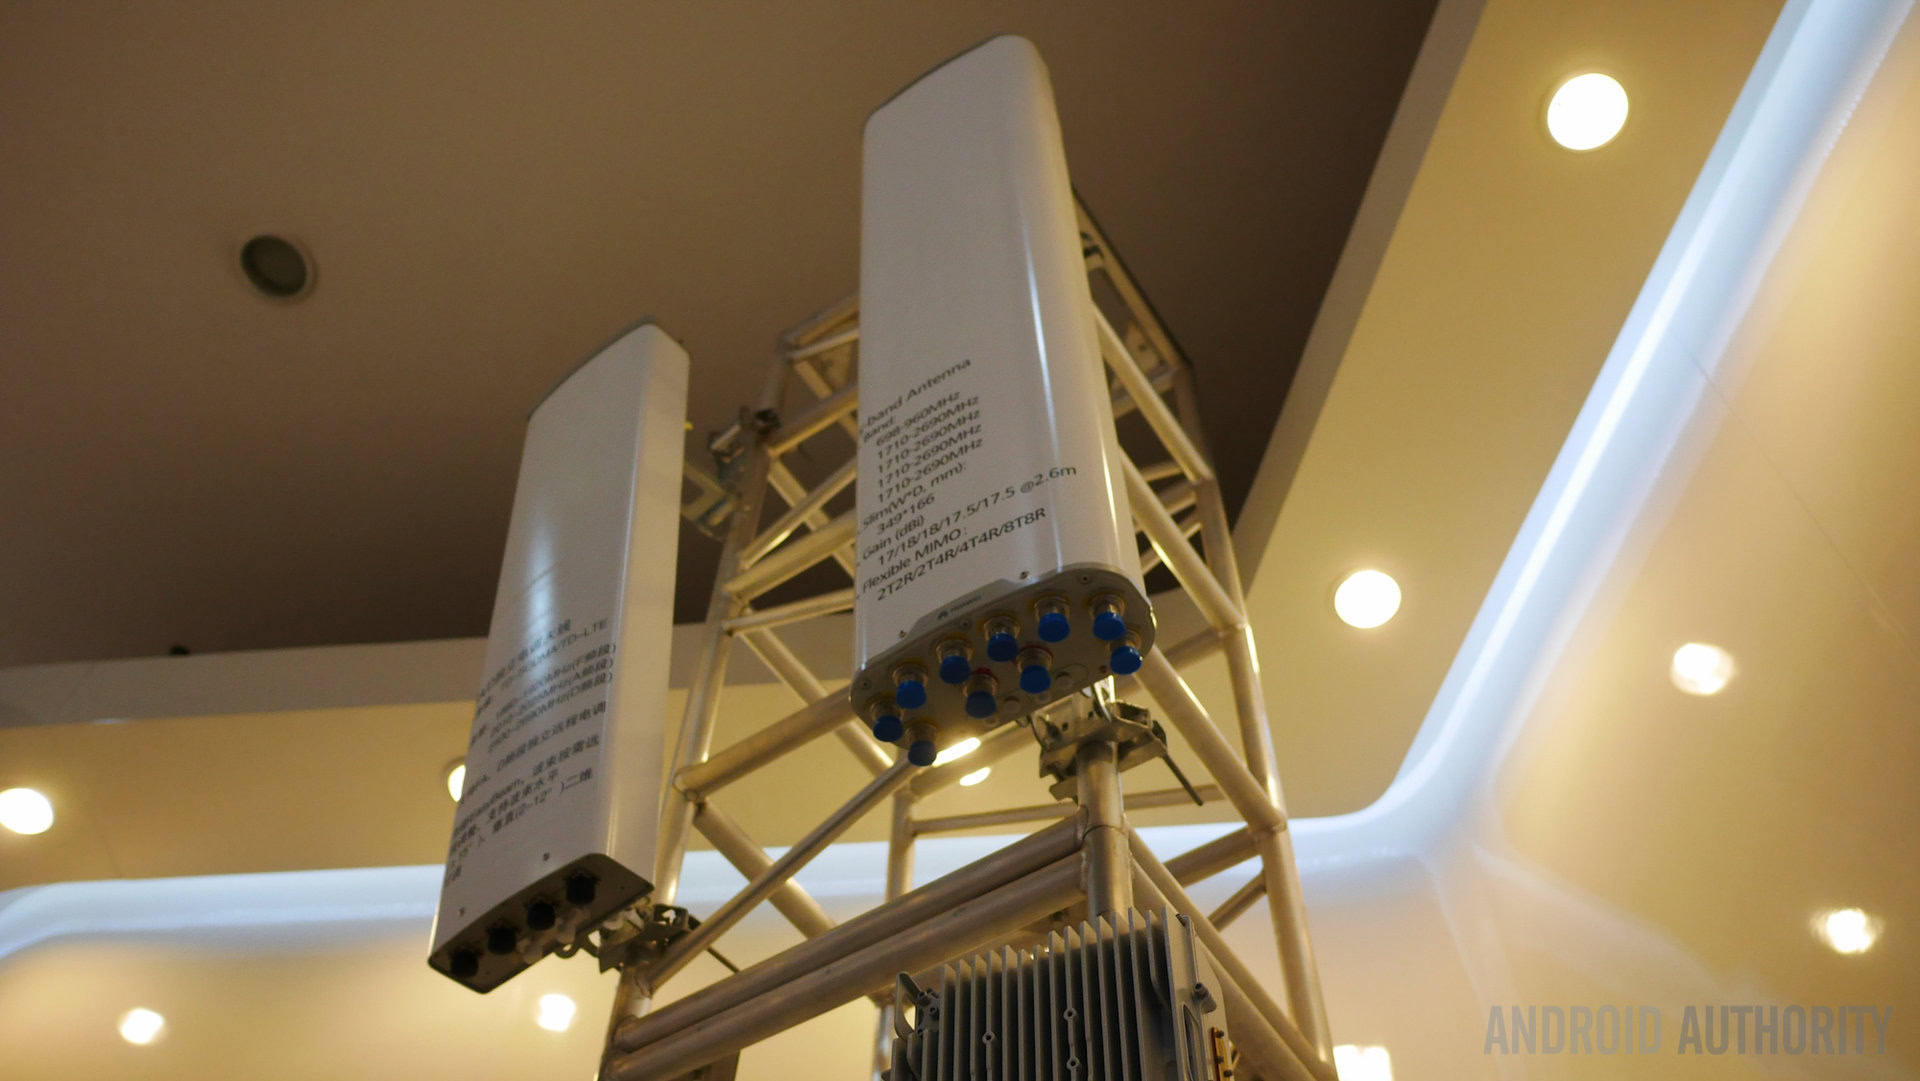 5G network tower radio mounted on scaffolding